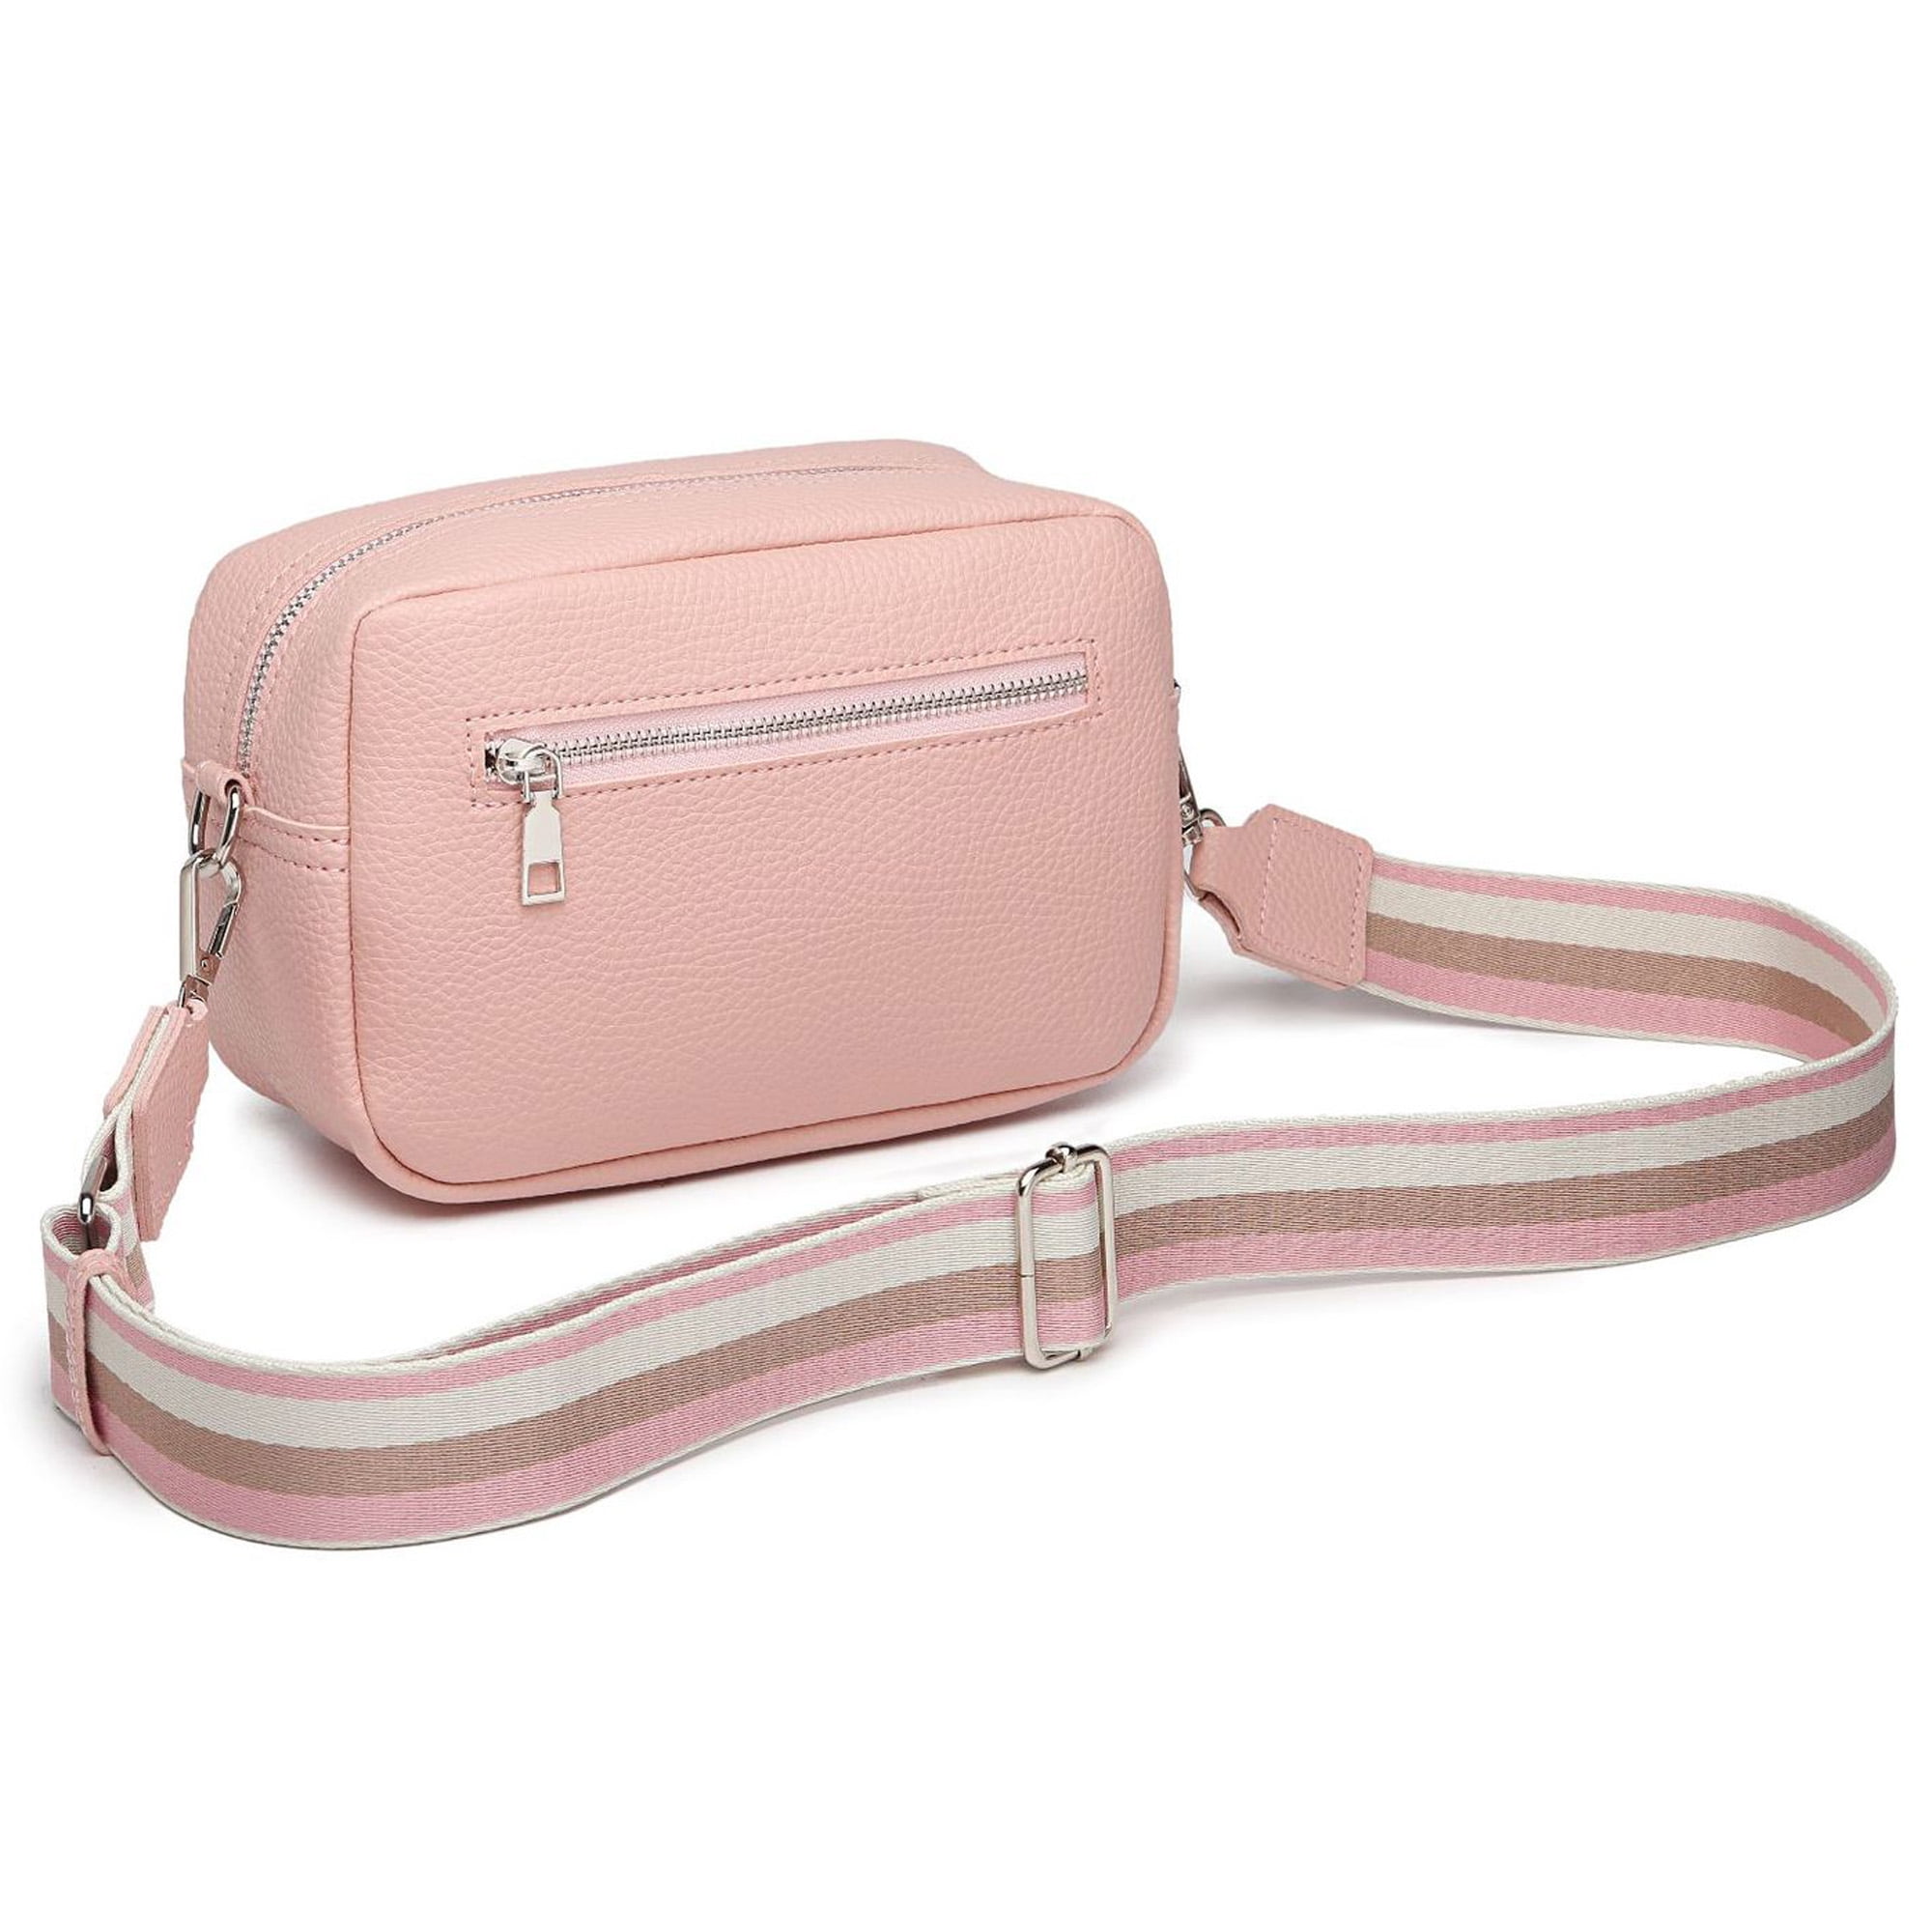 Waterproof Cute Small Crossbody Bag Simple Chest Bag With Letter